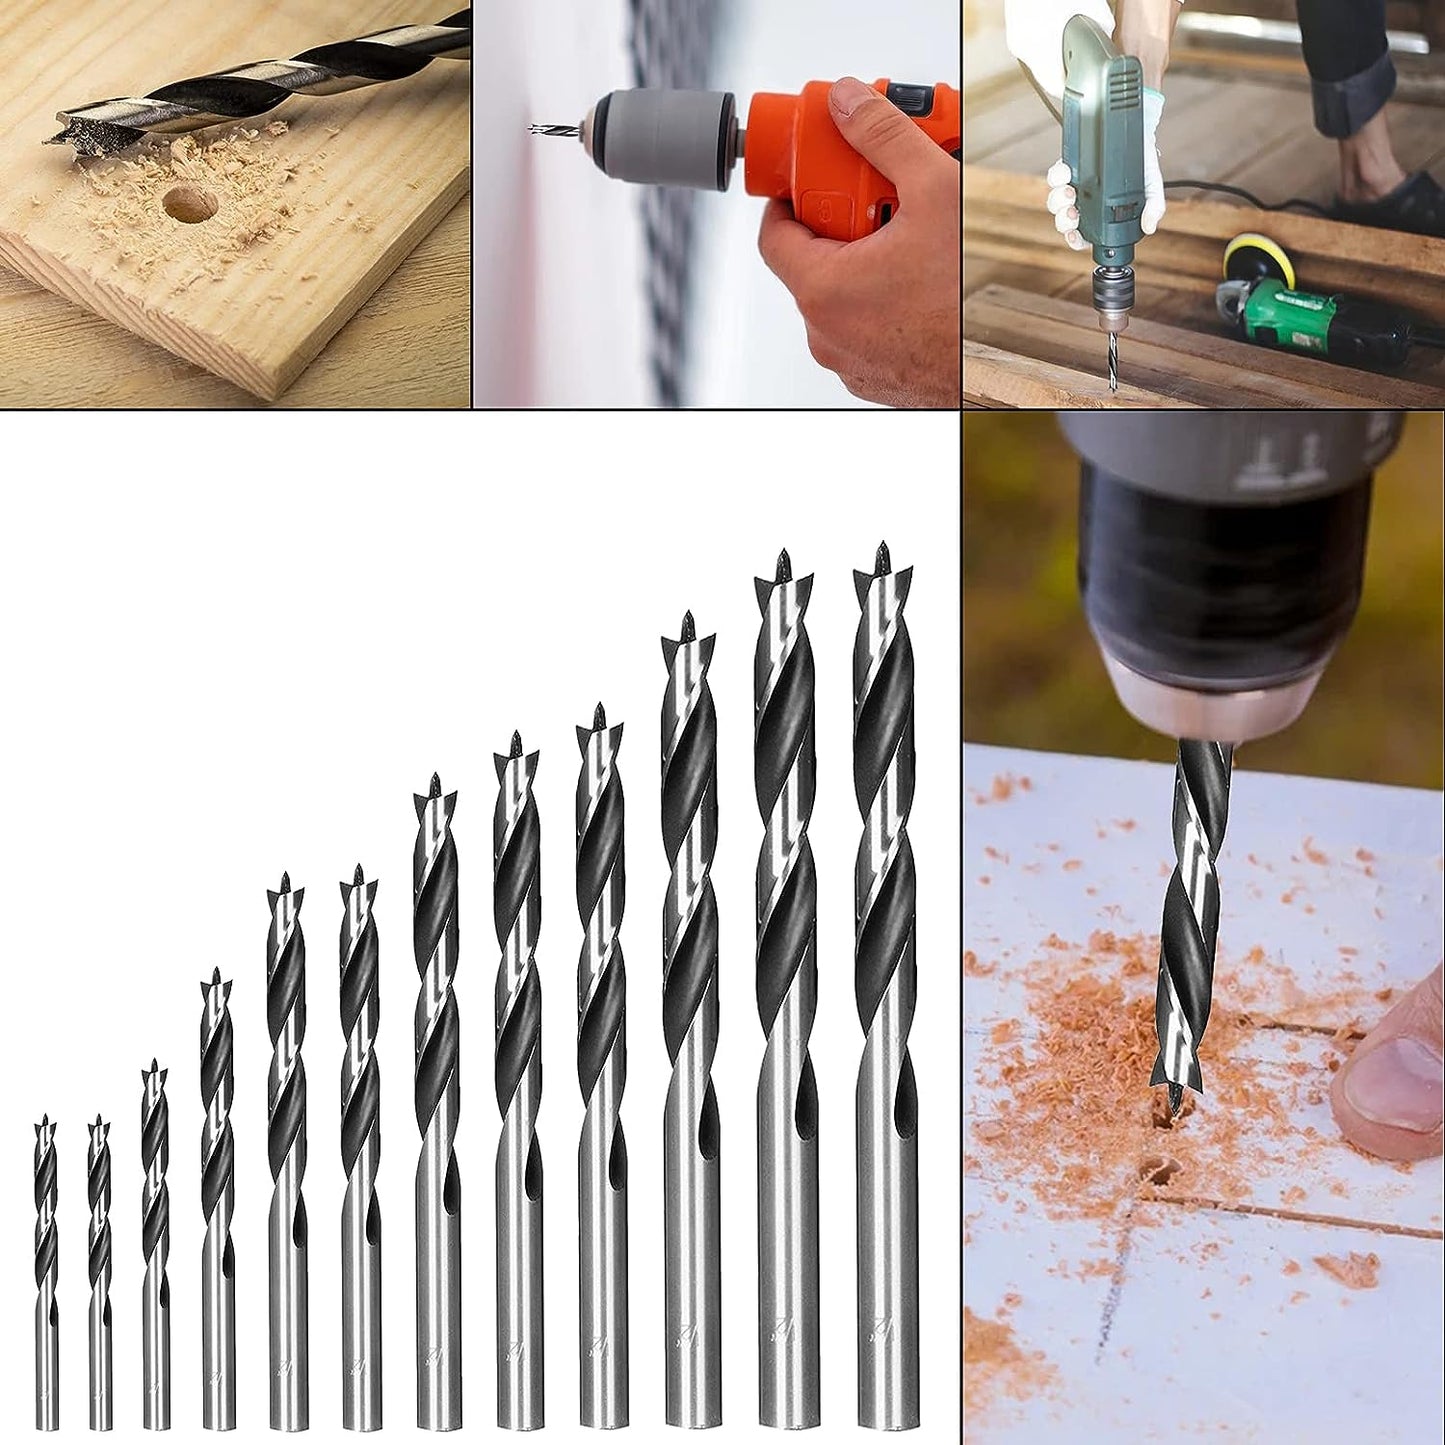 OWL TOOLS Brad Point Wood Drill Bit Set (12 Pack with Storage Case) Carpenters Quality - Drill Splinter-Free Perfectly Round Holes in All Types of Wood